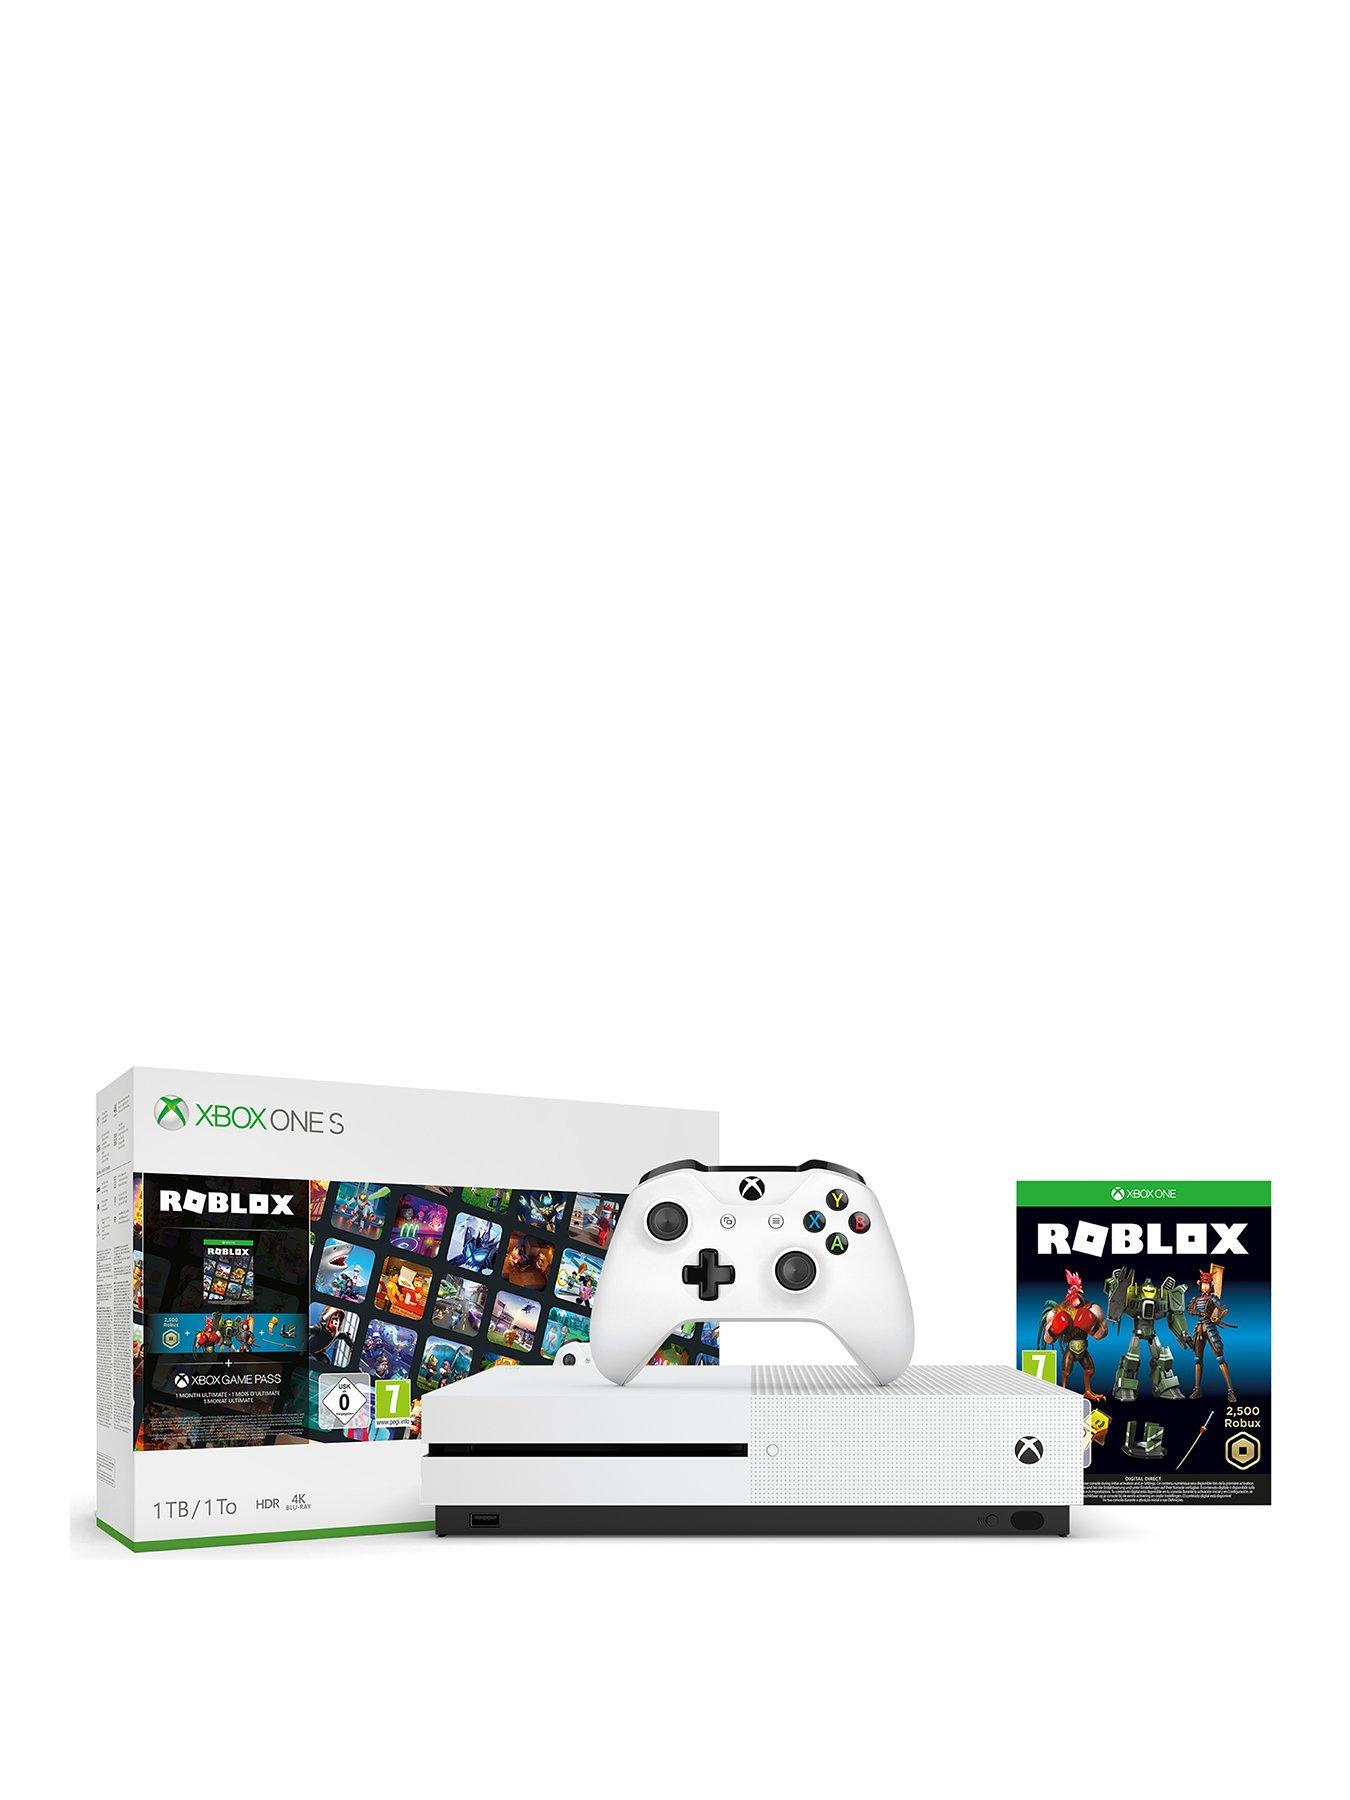 Xbox One S With Roblox Bundle And Optional Extras 1tb Console White Very Co Uk - roblox xbox 360 tutorial